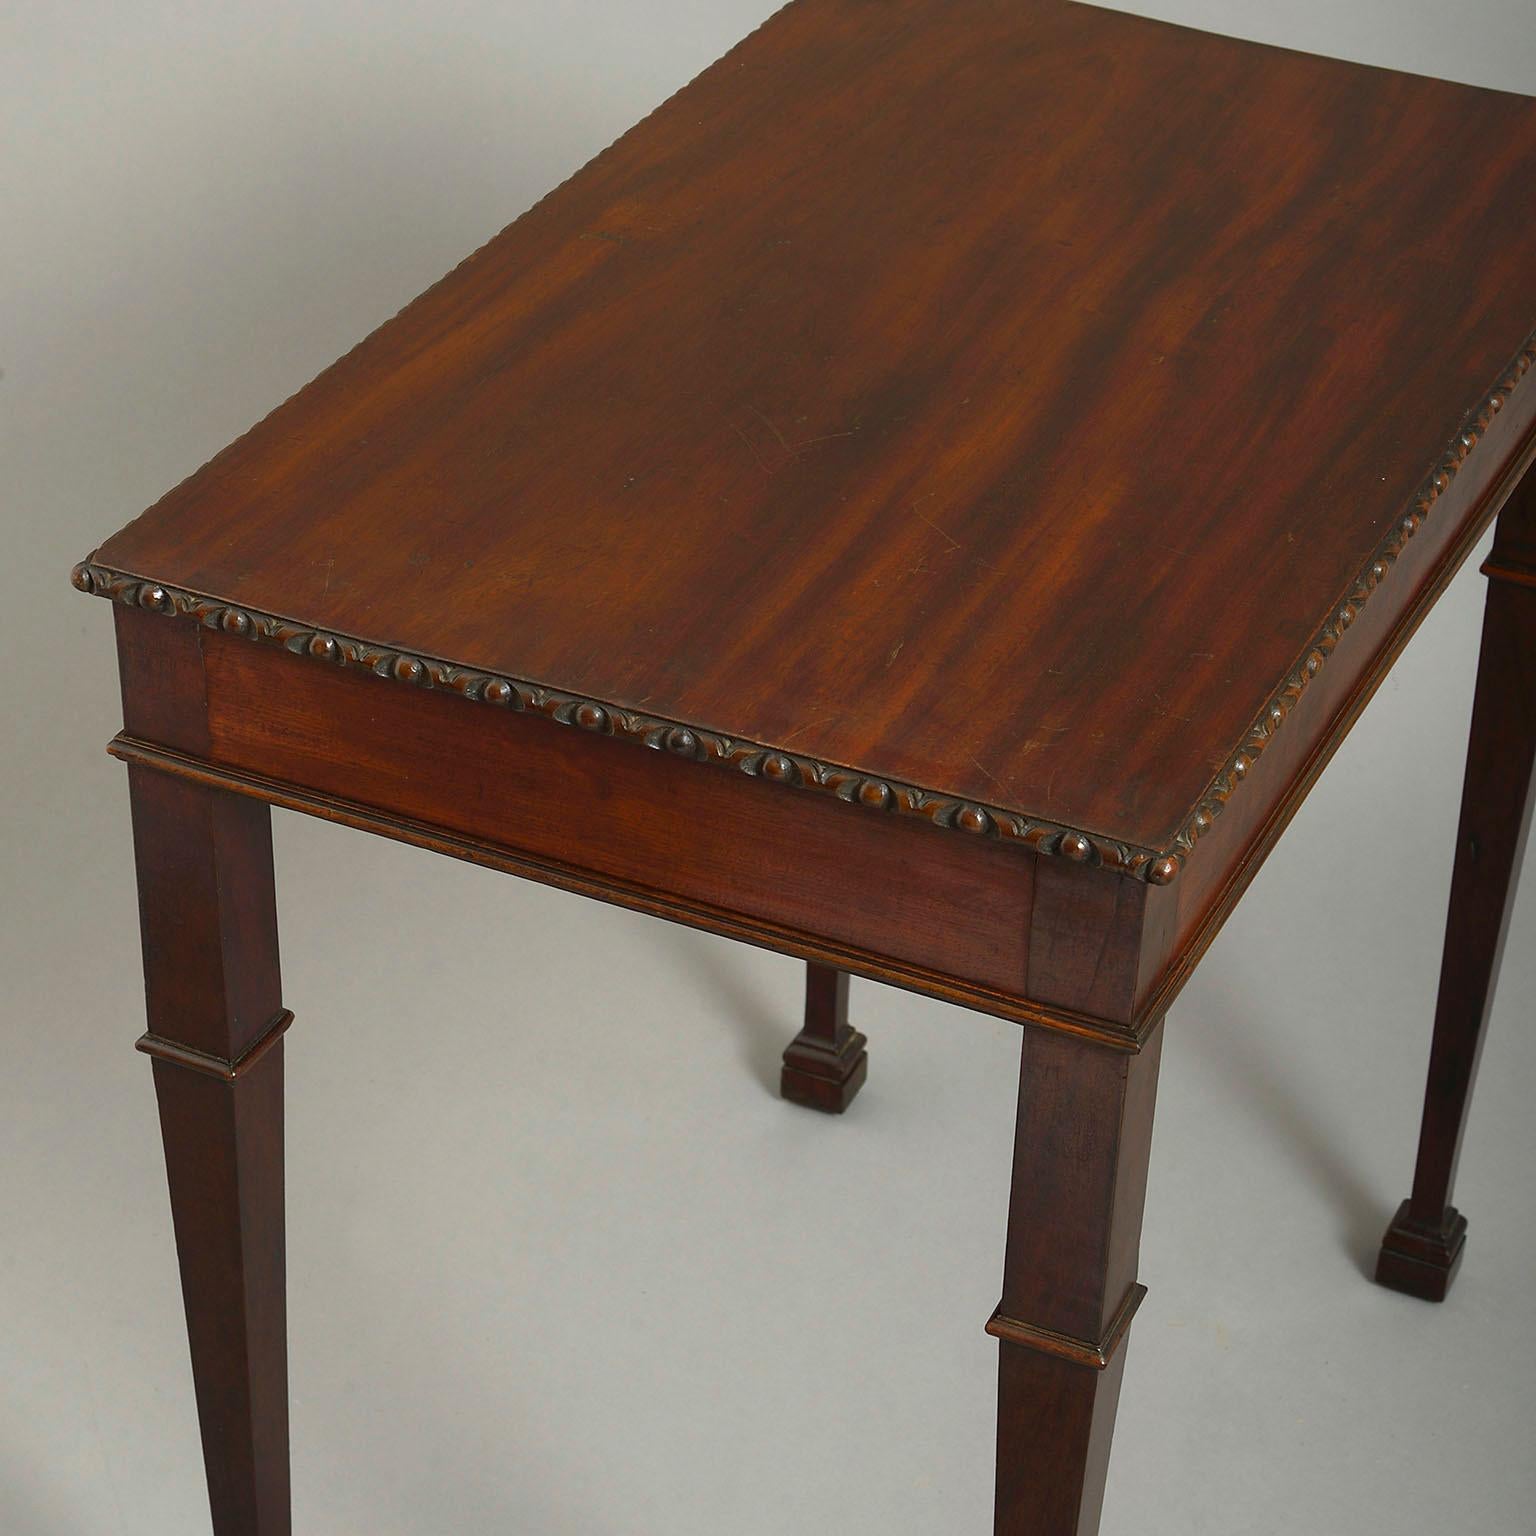 Hand-Carved Early George III Style Mahogany Table